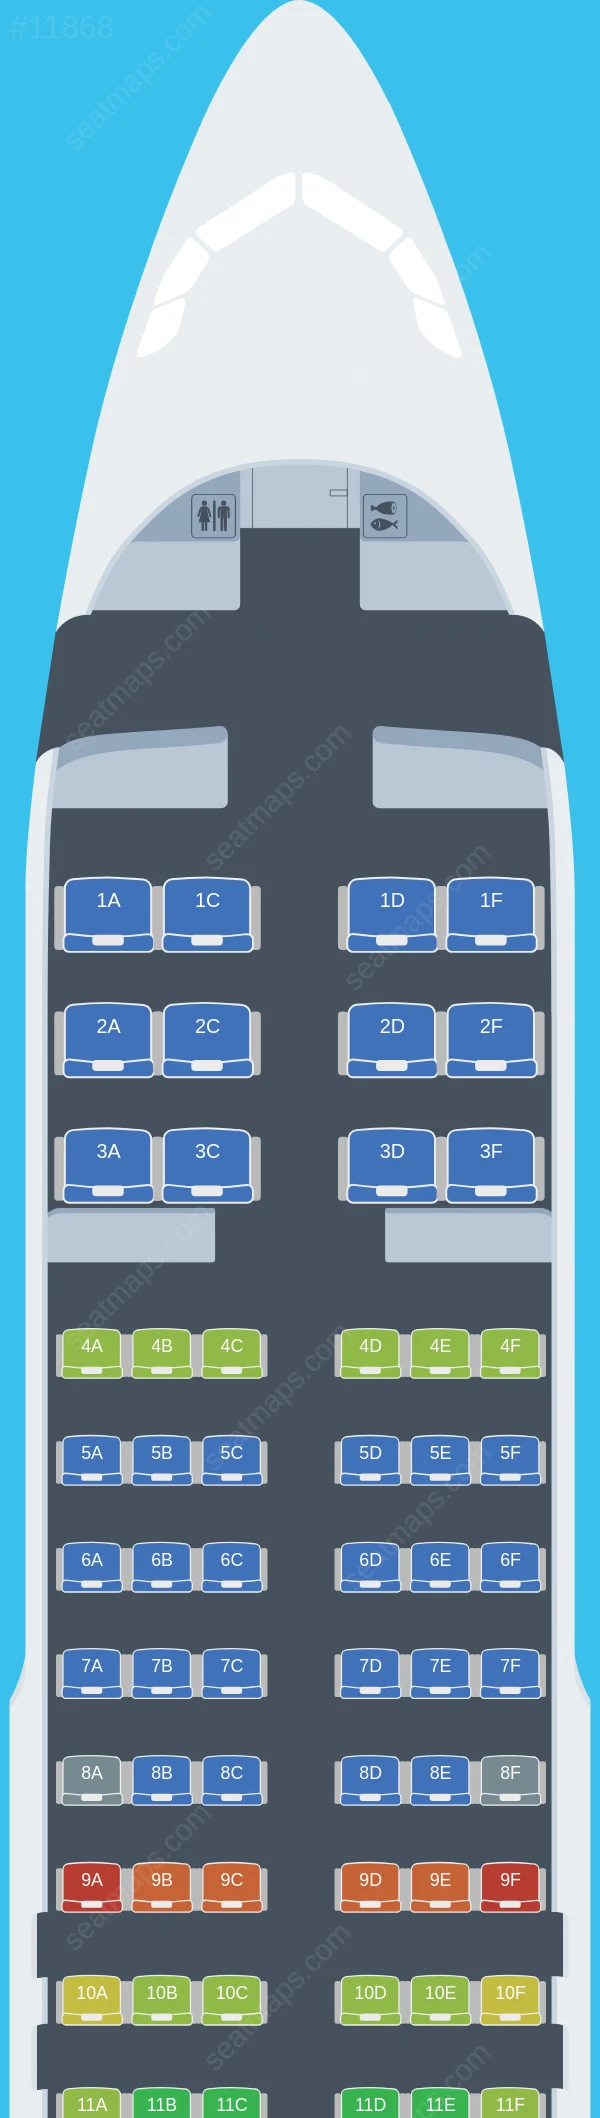 Uganda Airlines Airbus A320-200 seatmap preview